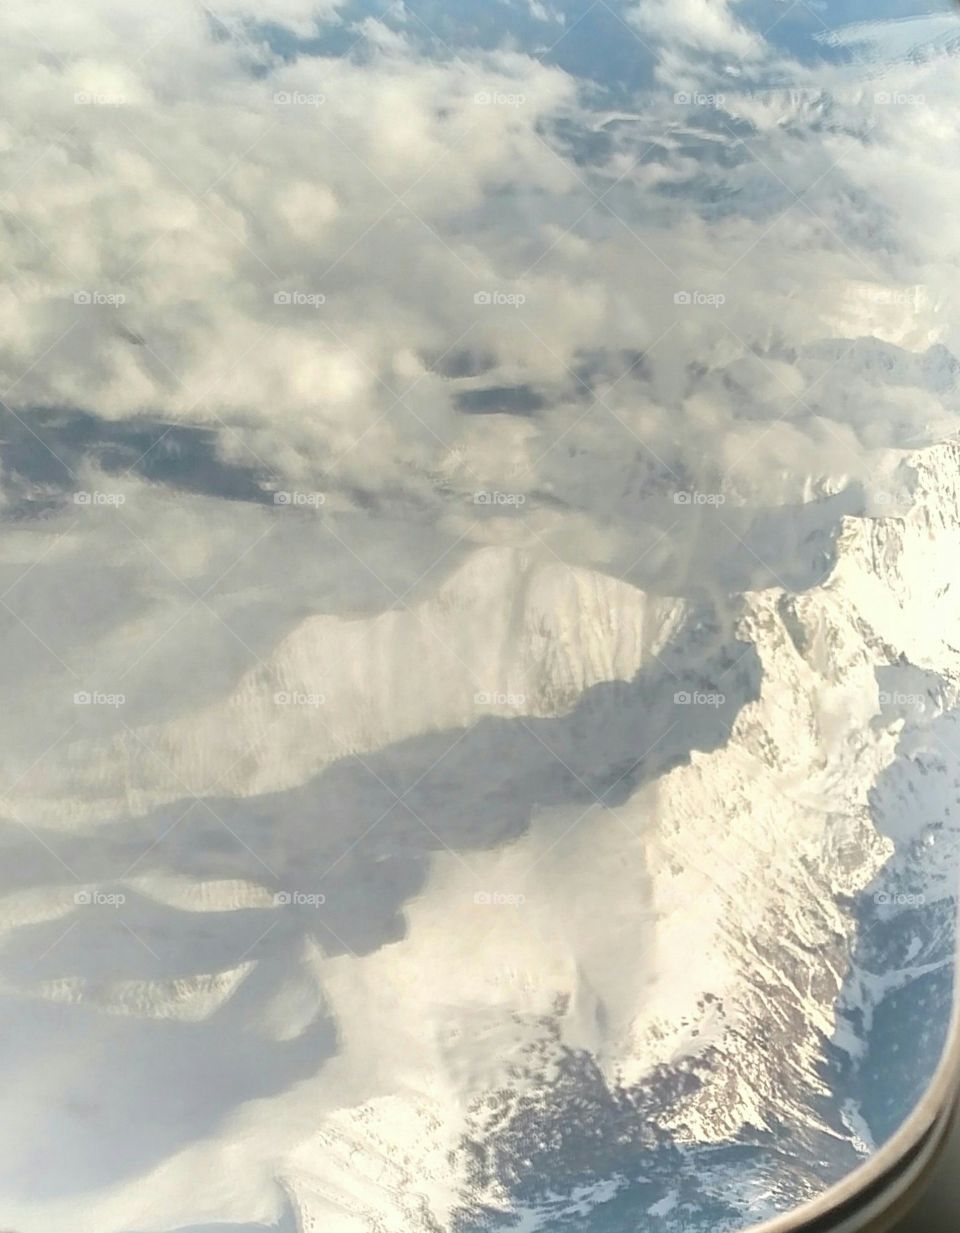 Colorado Rockies from a Plane Window. Flying over the Rockies heading to Vegas.